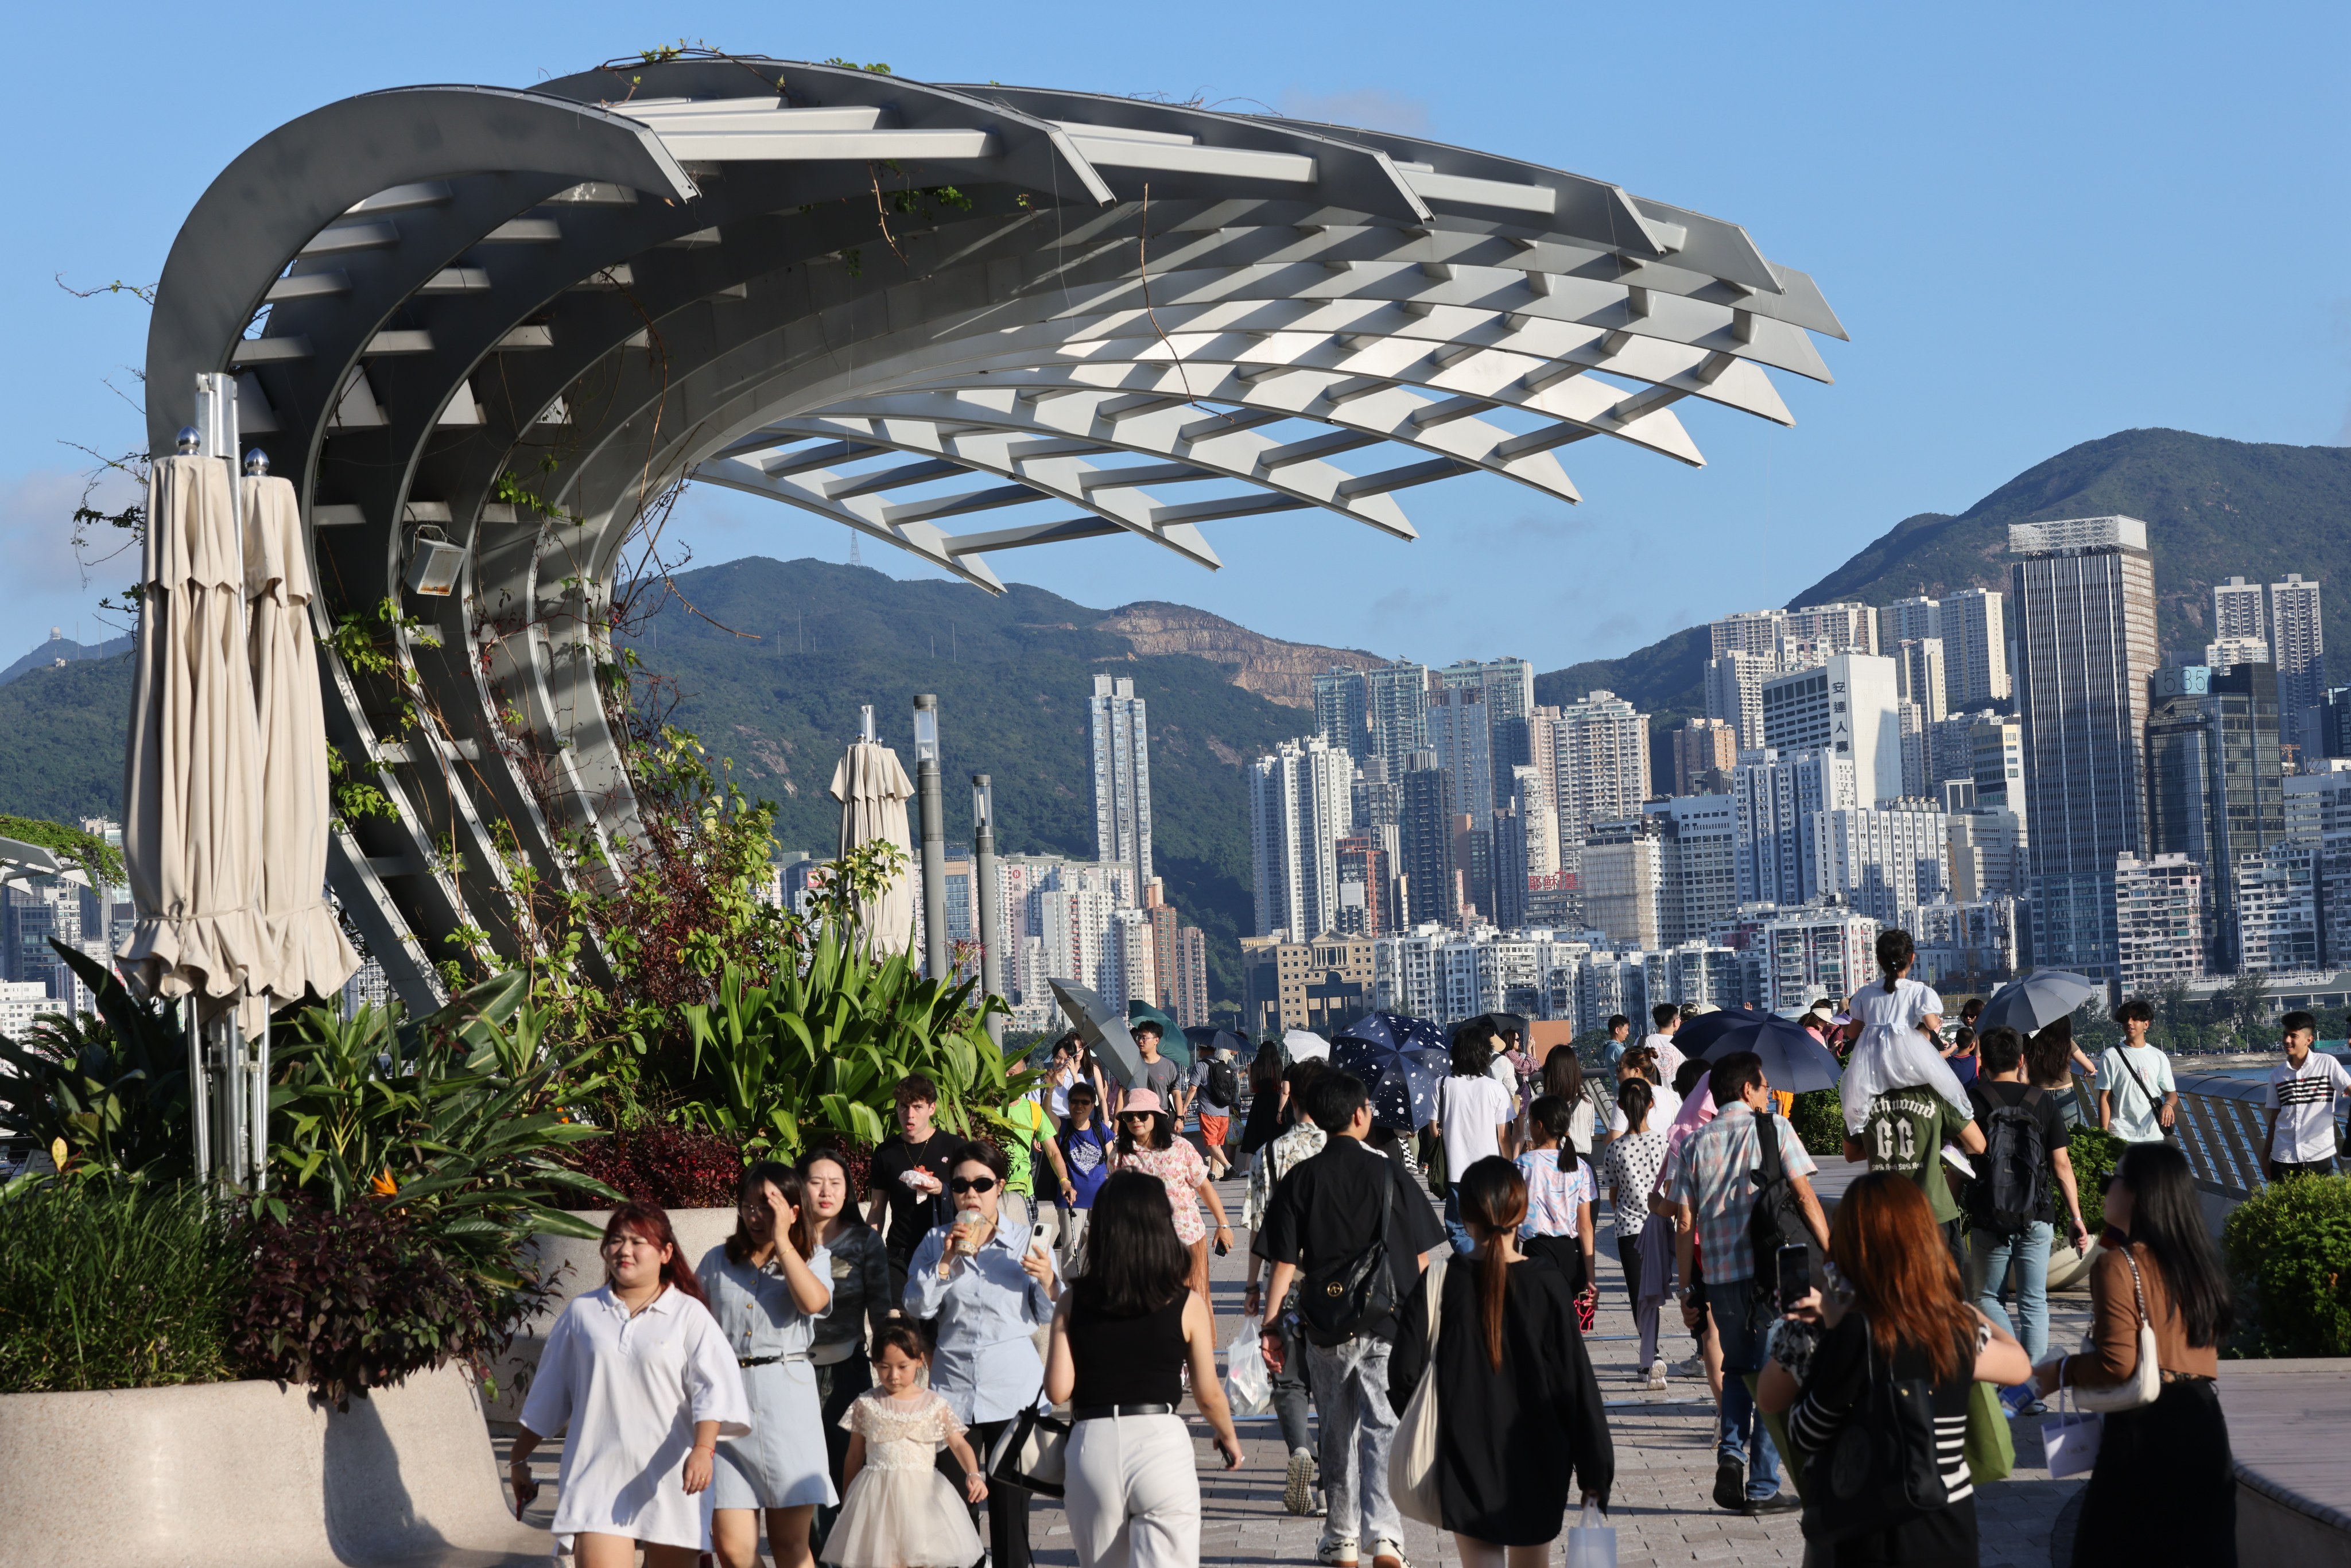 The Travel Industry Council earlier estimated about 1 million tourists from across the border would visit the city during the eight-day holiday. Photo: Yeung-man